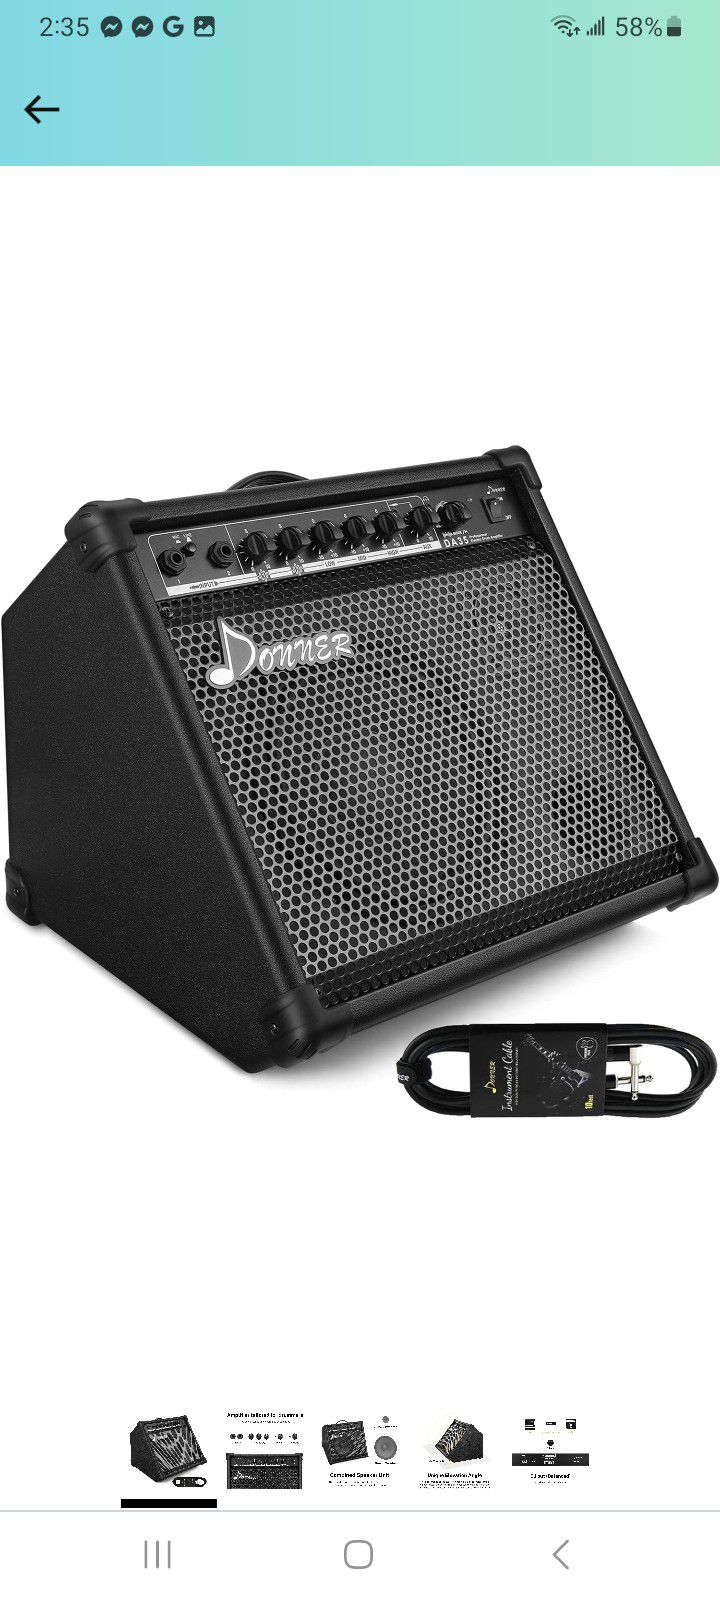 Donner Electric Drum AMP 35-Watt Electronic Drum Amplifier DDA-35 Keyboard Speaker with Aux in and Wireless Audio Connection, Drum/Keyboard/MIC 3 in 1